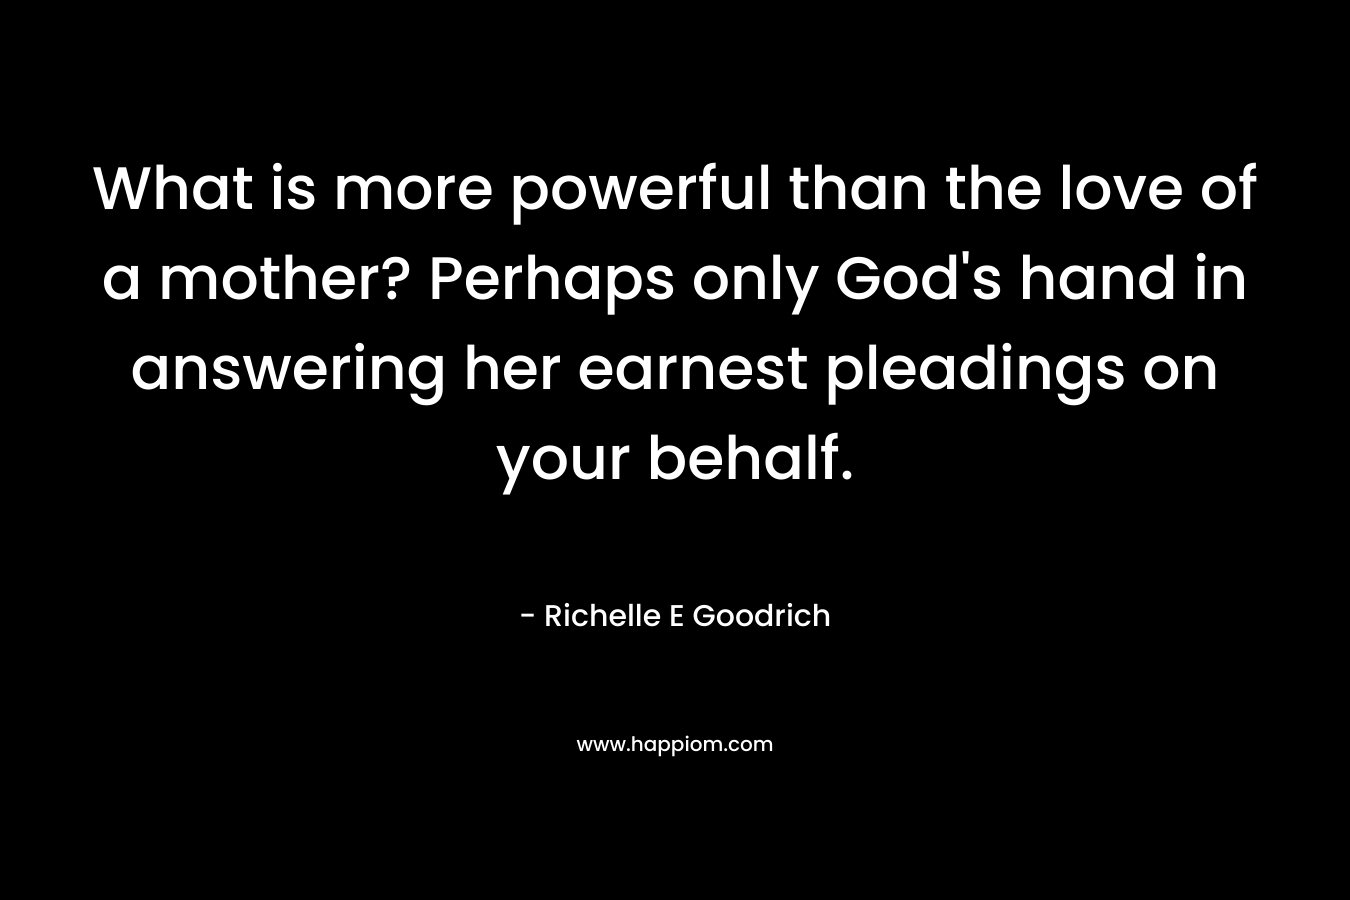 What is more powerful than the love of a mother? Perhaps only God’s hand in answering her earnest pleadings on your behalf. – Richelle E Goodrich